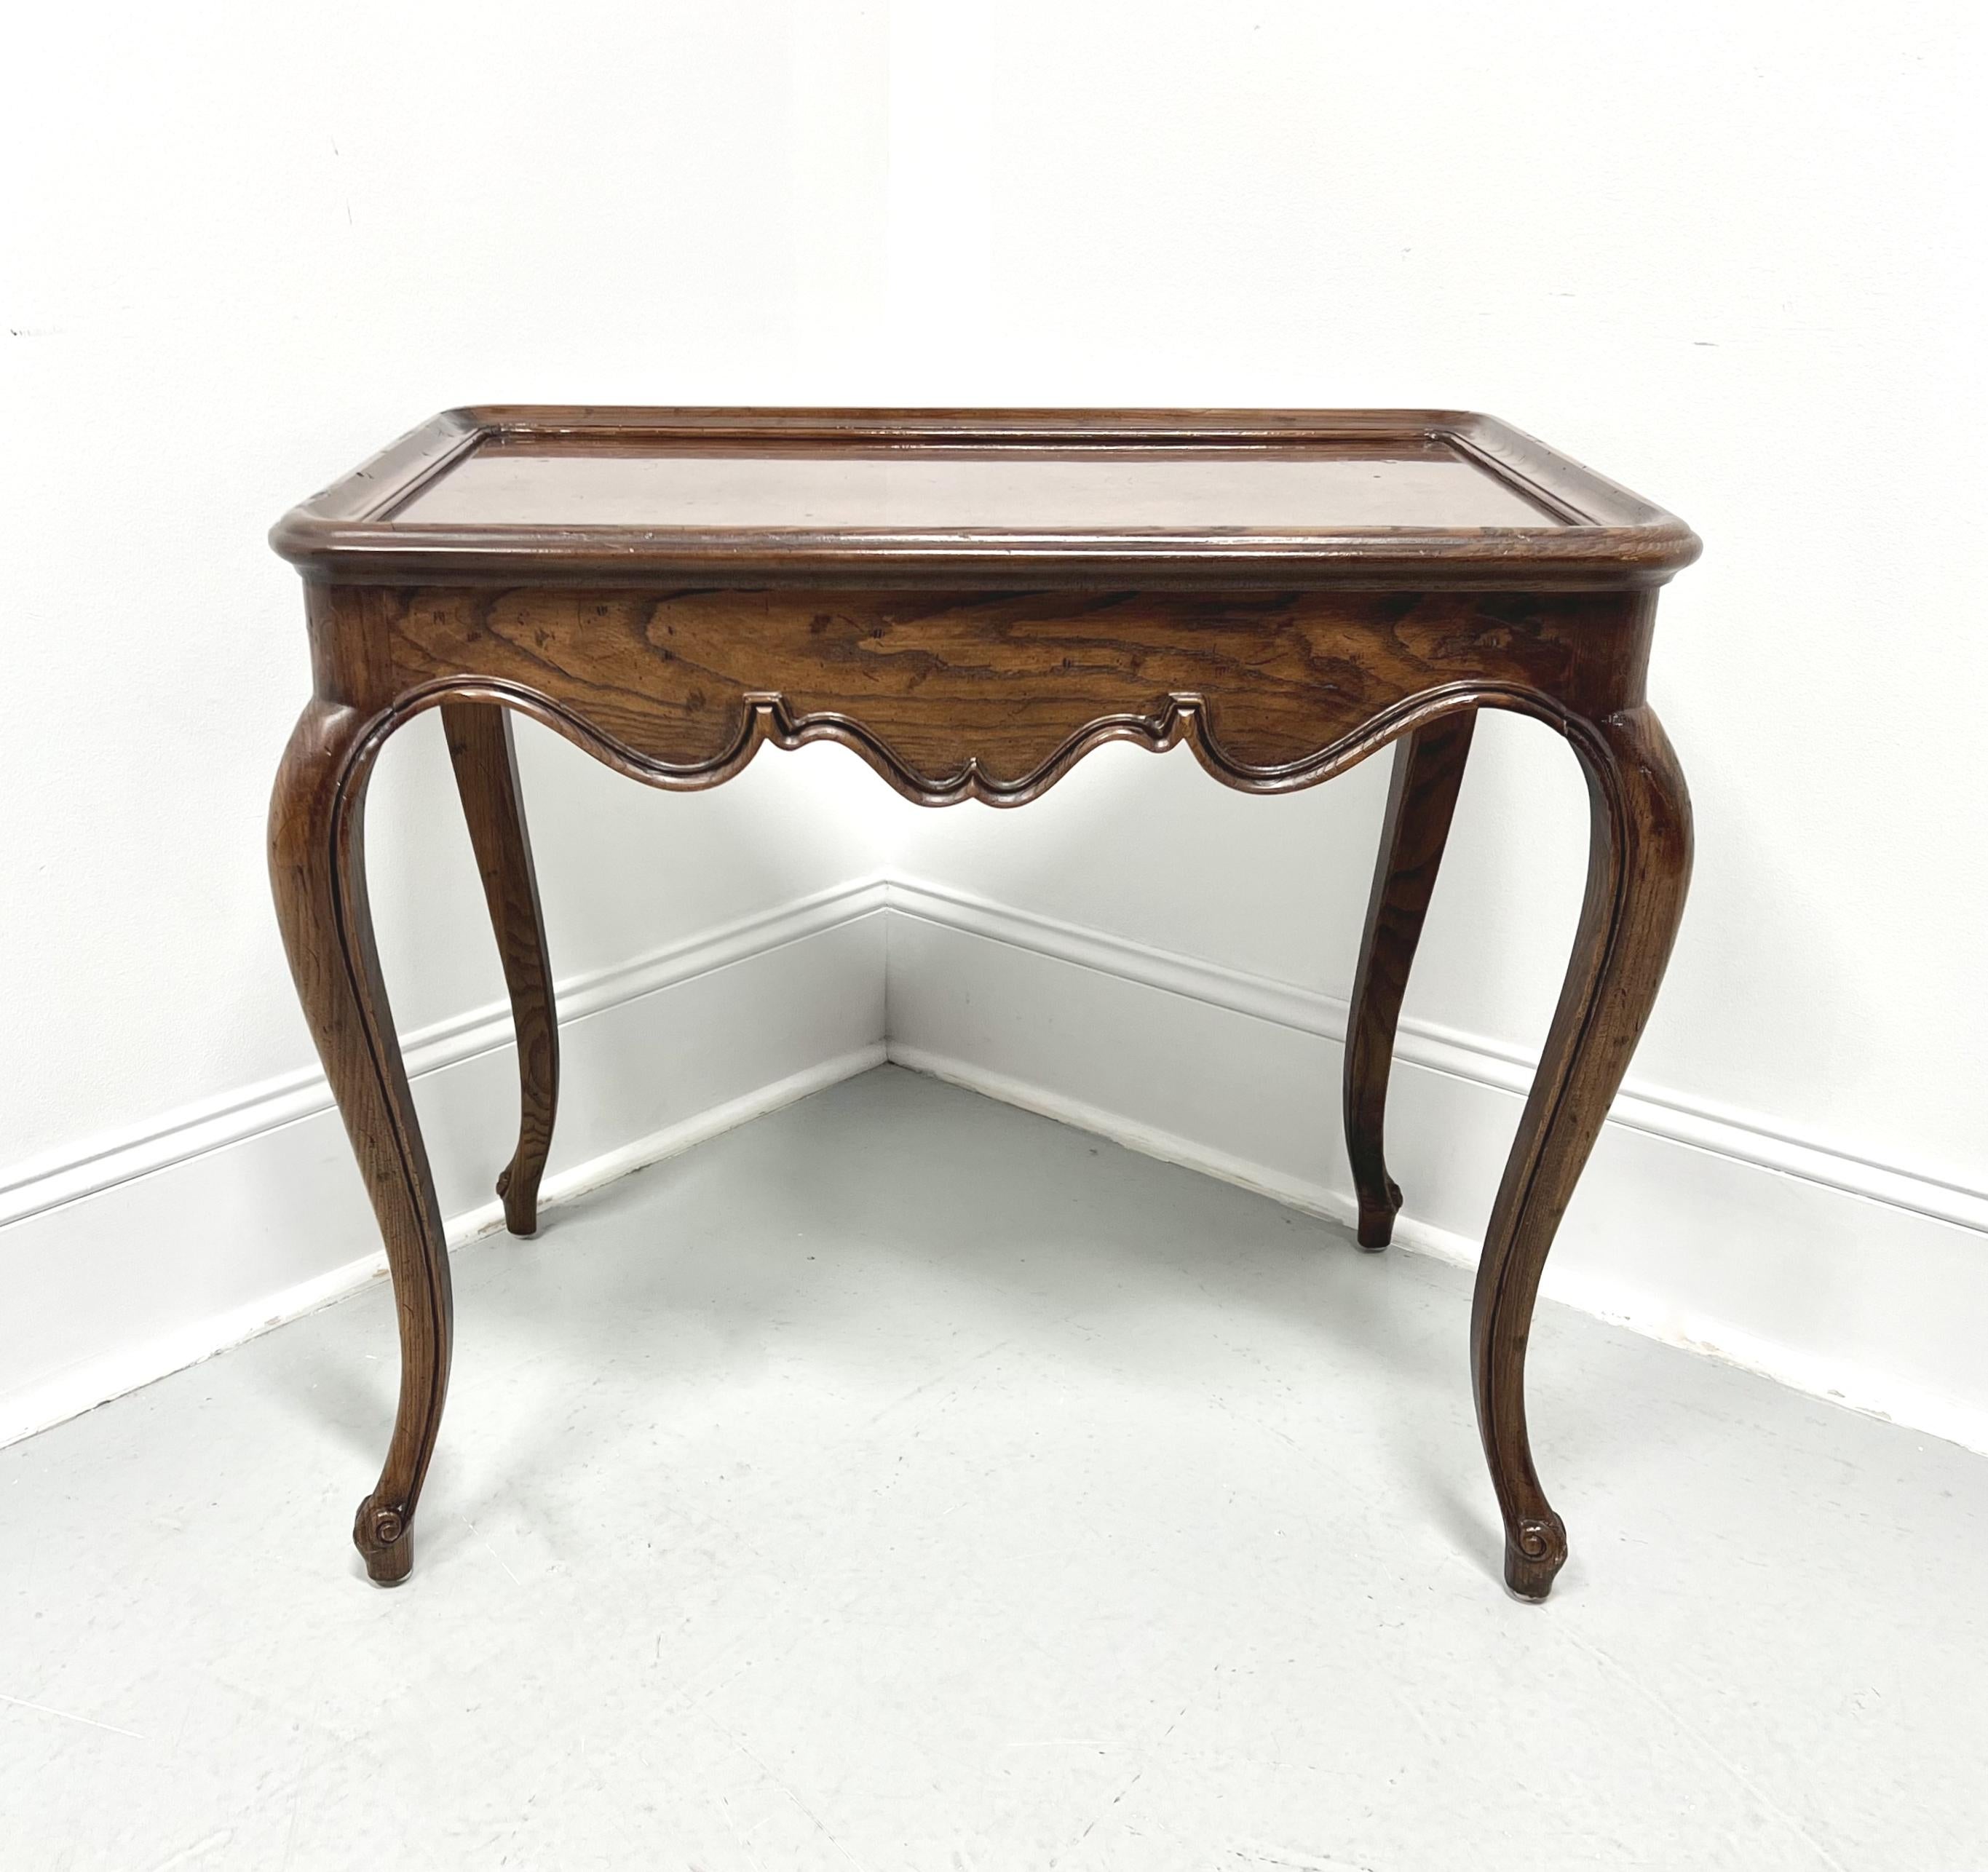 A tea table in the French Country style by Henredon. Burl oak with a distressed finish, bevel edge to the top with rounded corners, two side slide out trays with brass ring pulls, carved apron, curved legs, and scroll feet. Made in Morganton, North